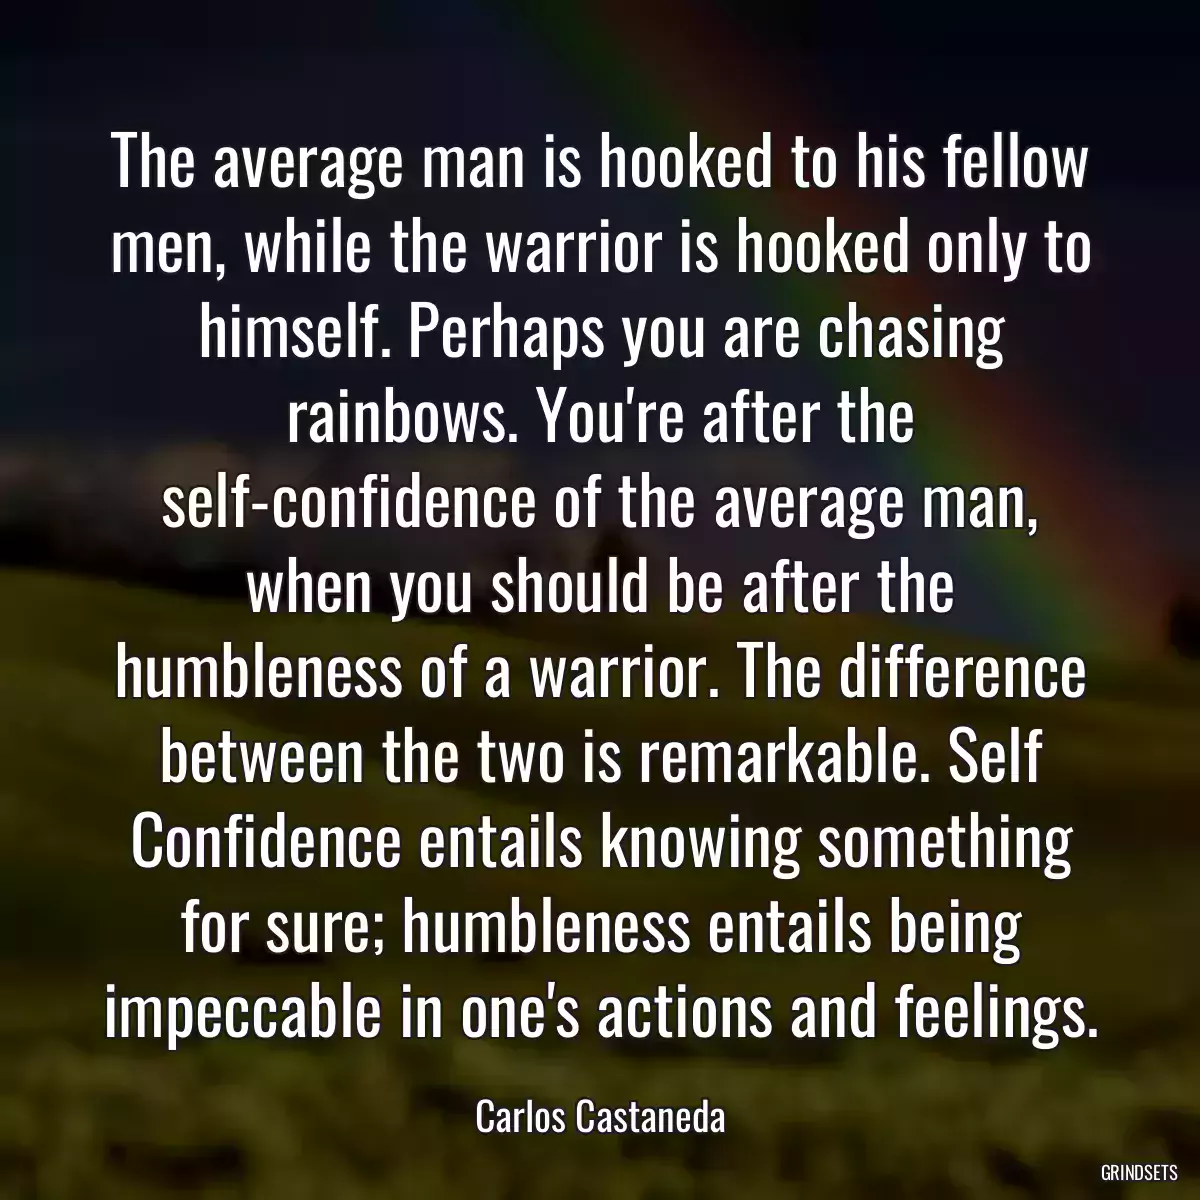 The average man is hooked to his fellow men, while the warrior is hooked only to himself. Perhaps you are chasing rainbows. You\'re after the self-confidence of the average man, when you should be after the humbleness of a warrior. The difference between the two is remarkable. Self Confidence entails knowing something for sure; humbleness entails being impeccable in one\'s actions and feelings.